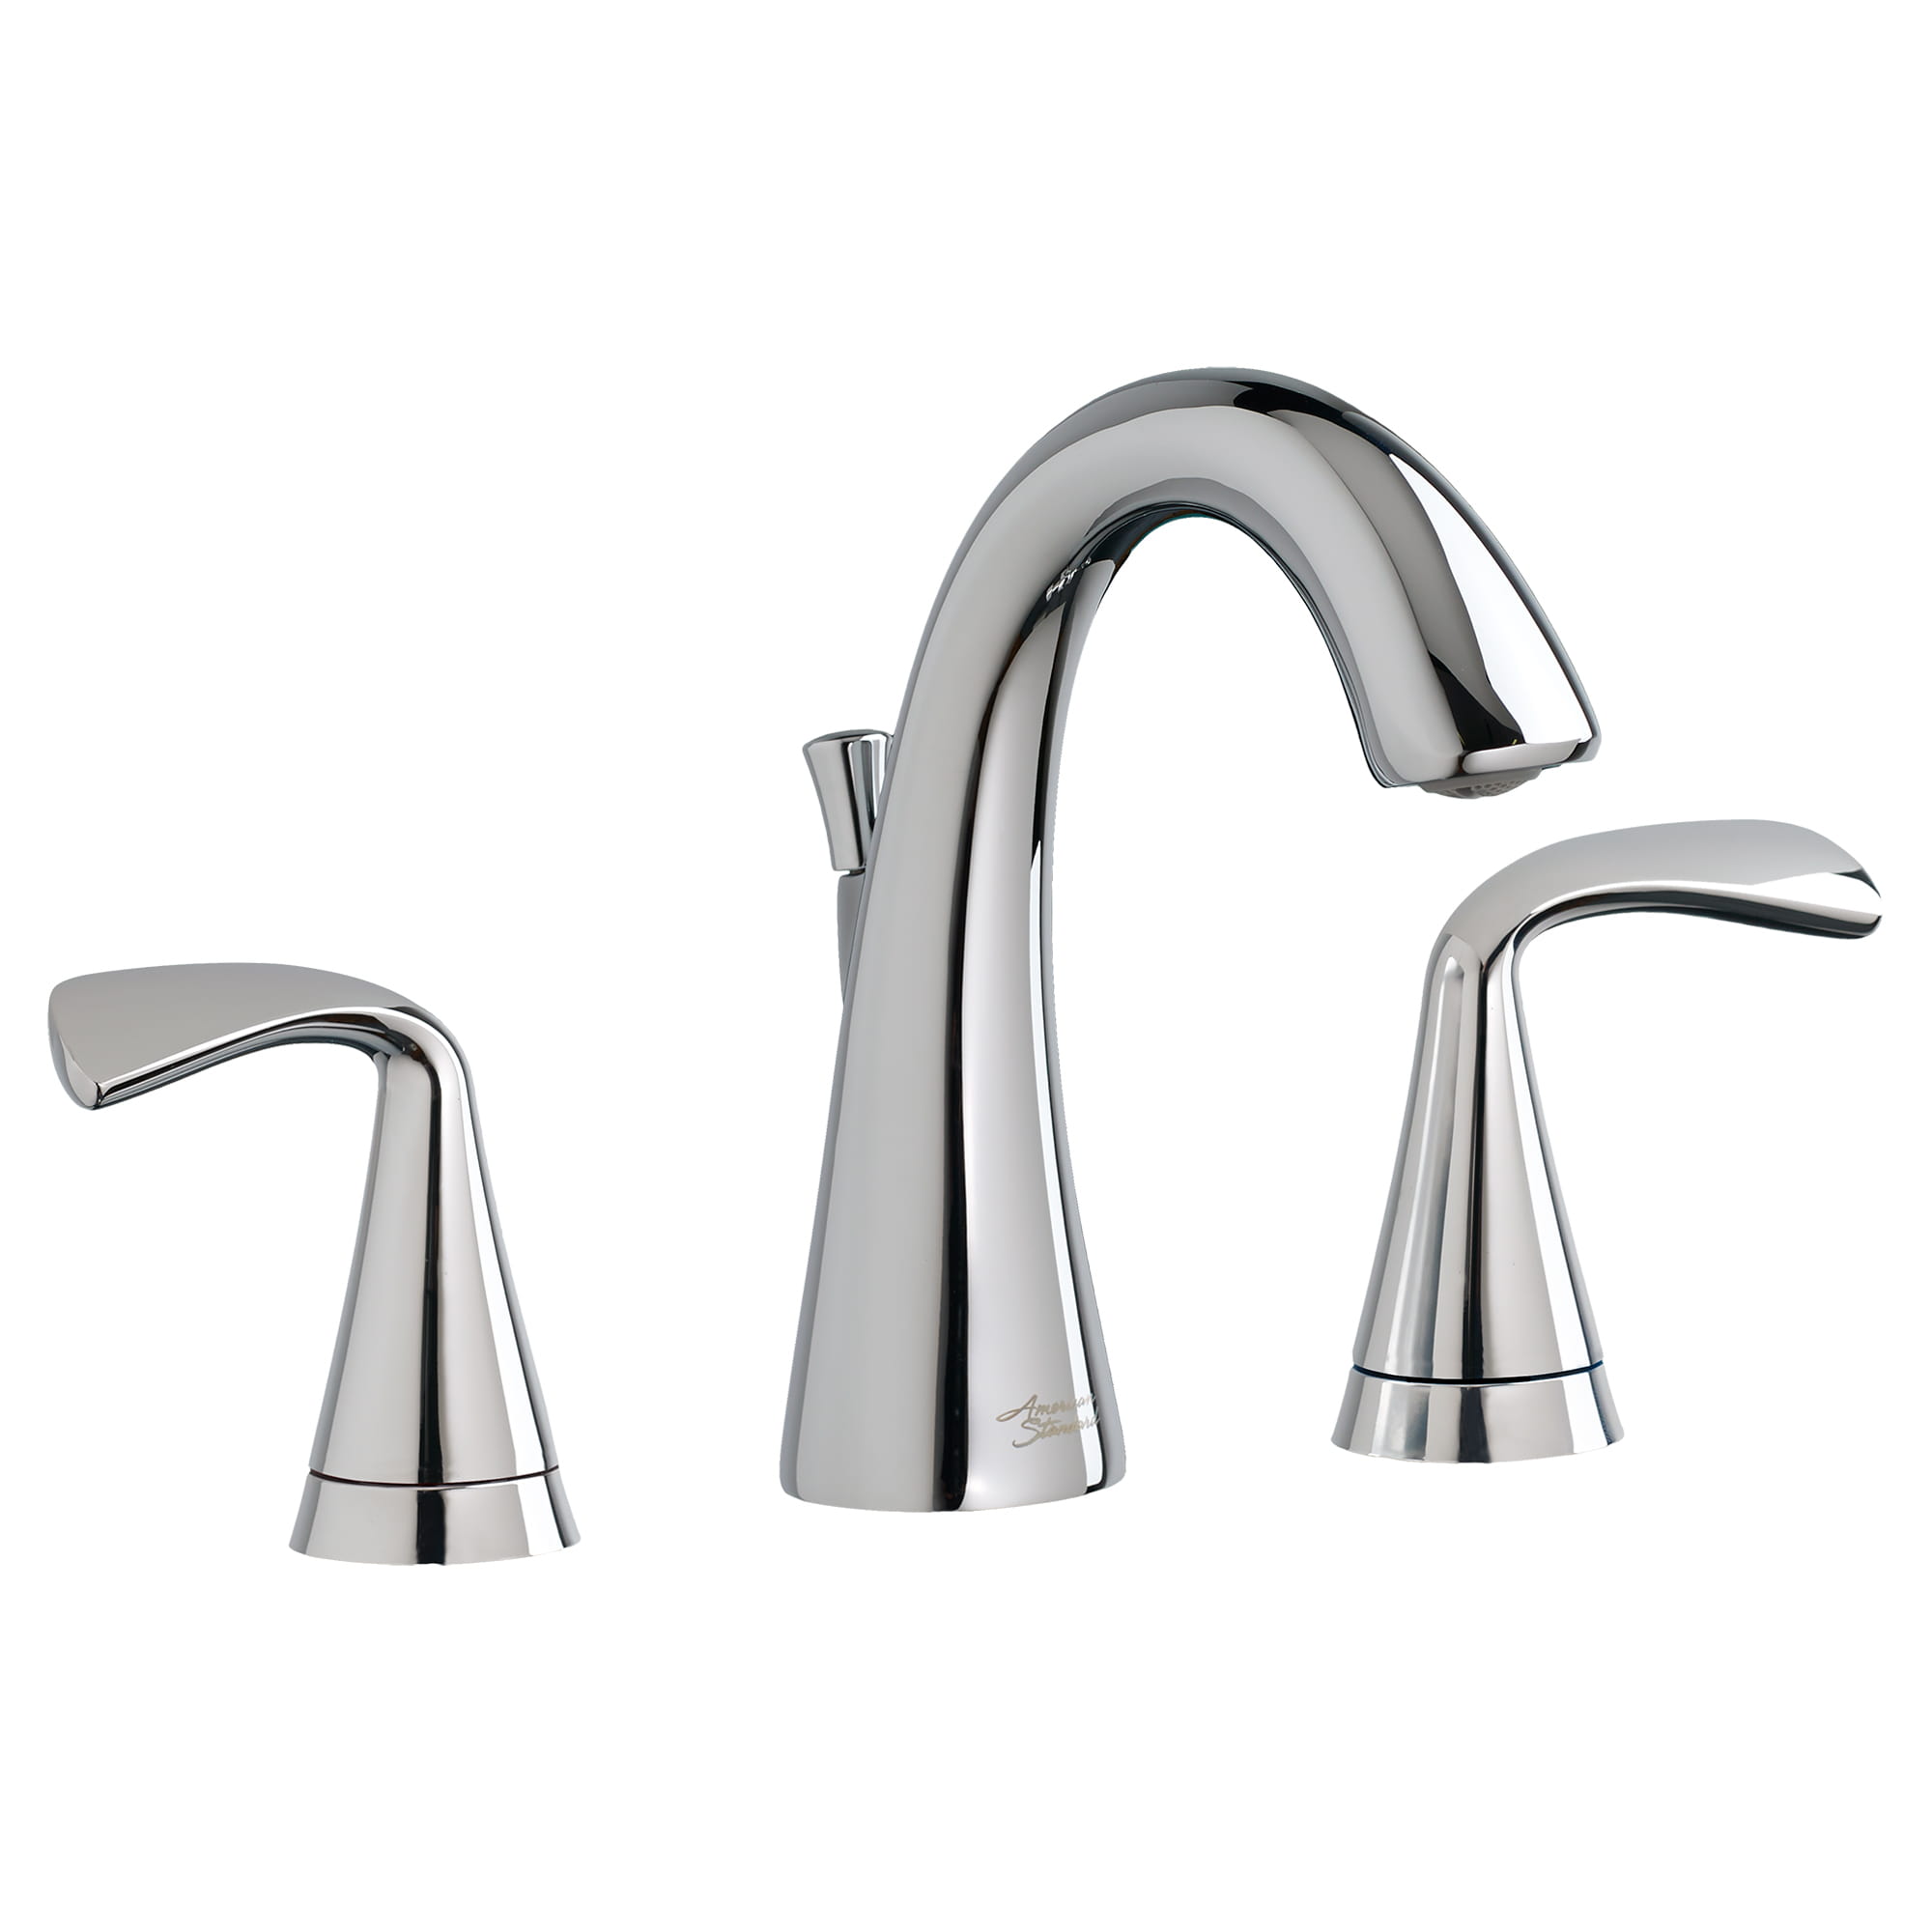 Fluent® 8-Inch Widespread 2-Handle Bathroom Faucet 1.2 gpm/4.5 L/min With Lever Handles